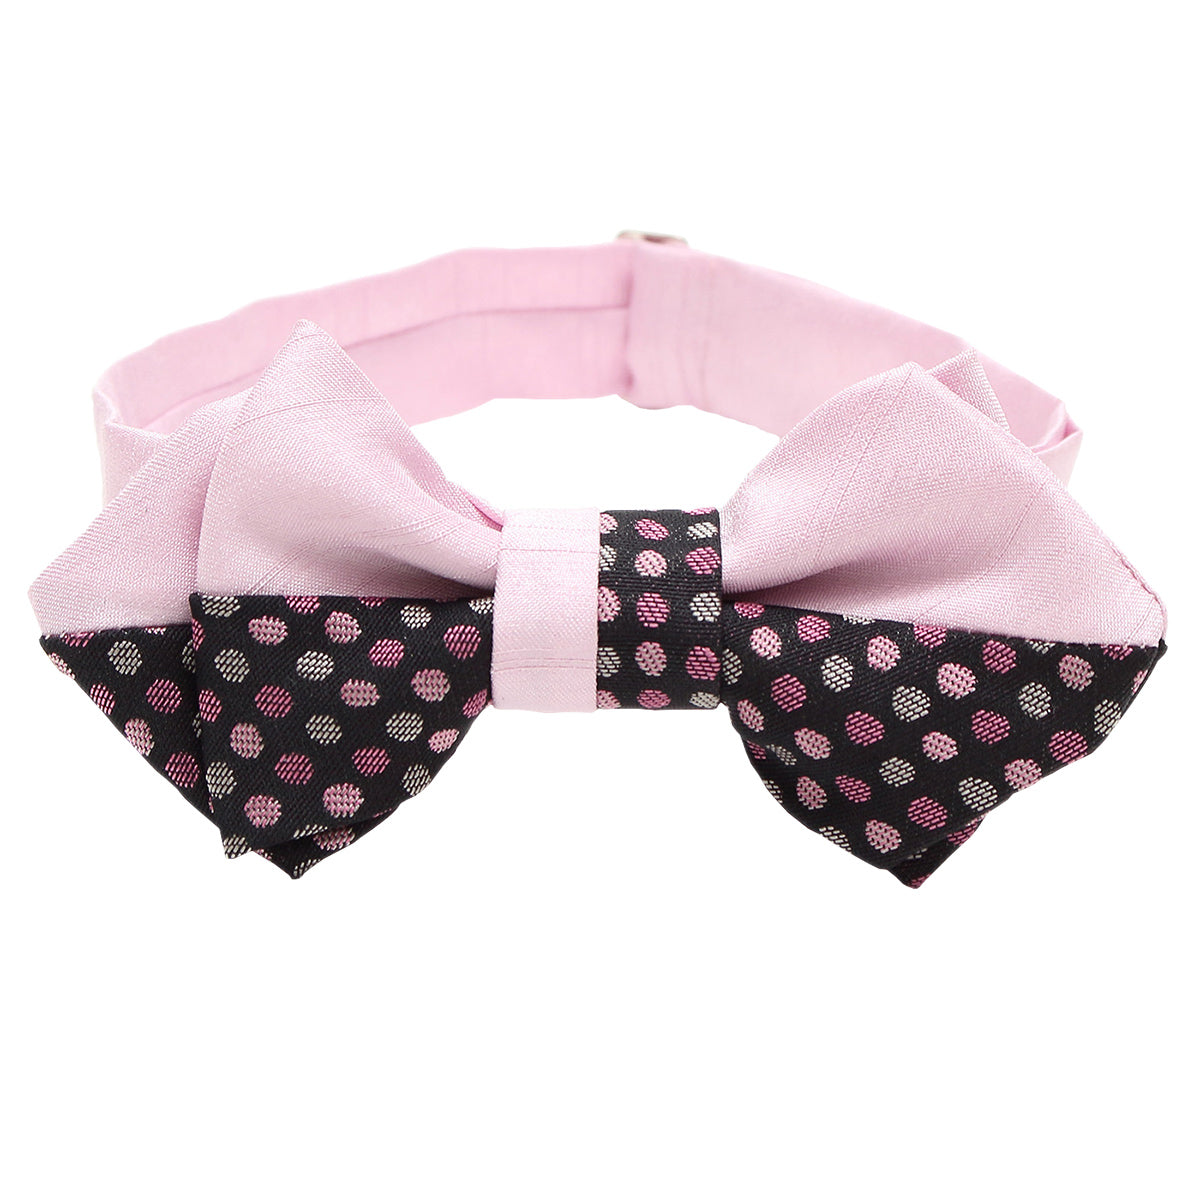 Men’s Pre-Tied Adjustable Bow Tie -21. MIZUTAMA Japanese Traditional Dots Pattern Made in Japan FORTUNA Tokyo